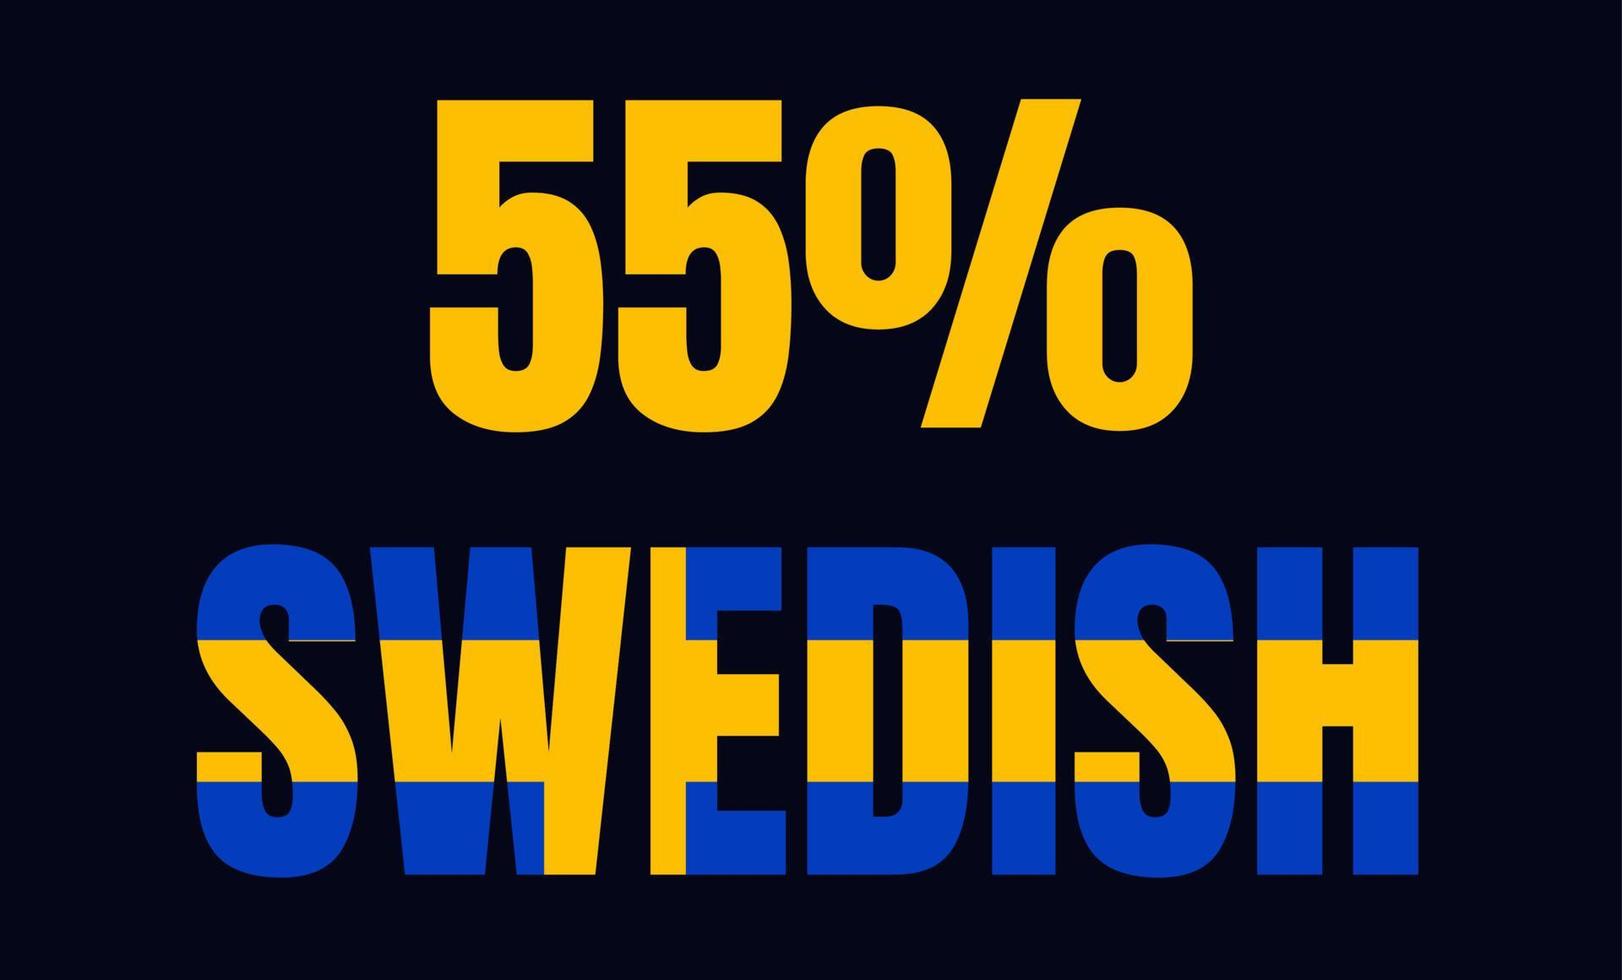 55 percentage Swedish sign label vector art illustration with fantastic font and blue yellow color